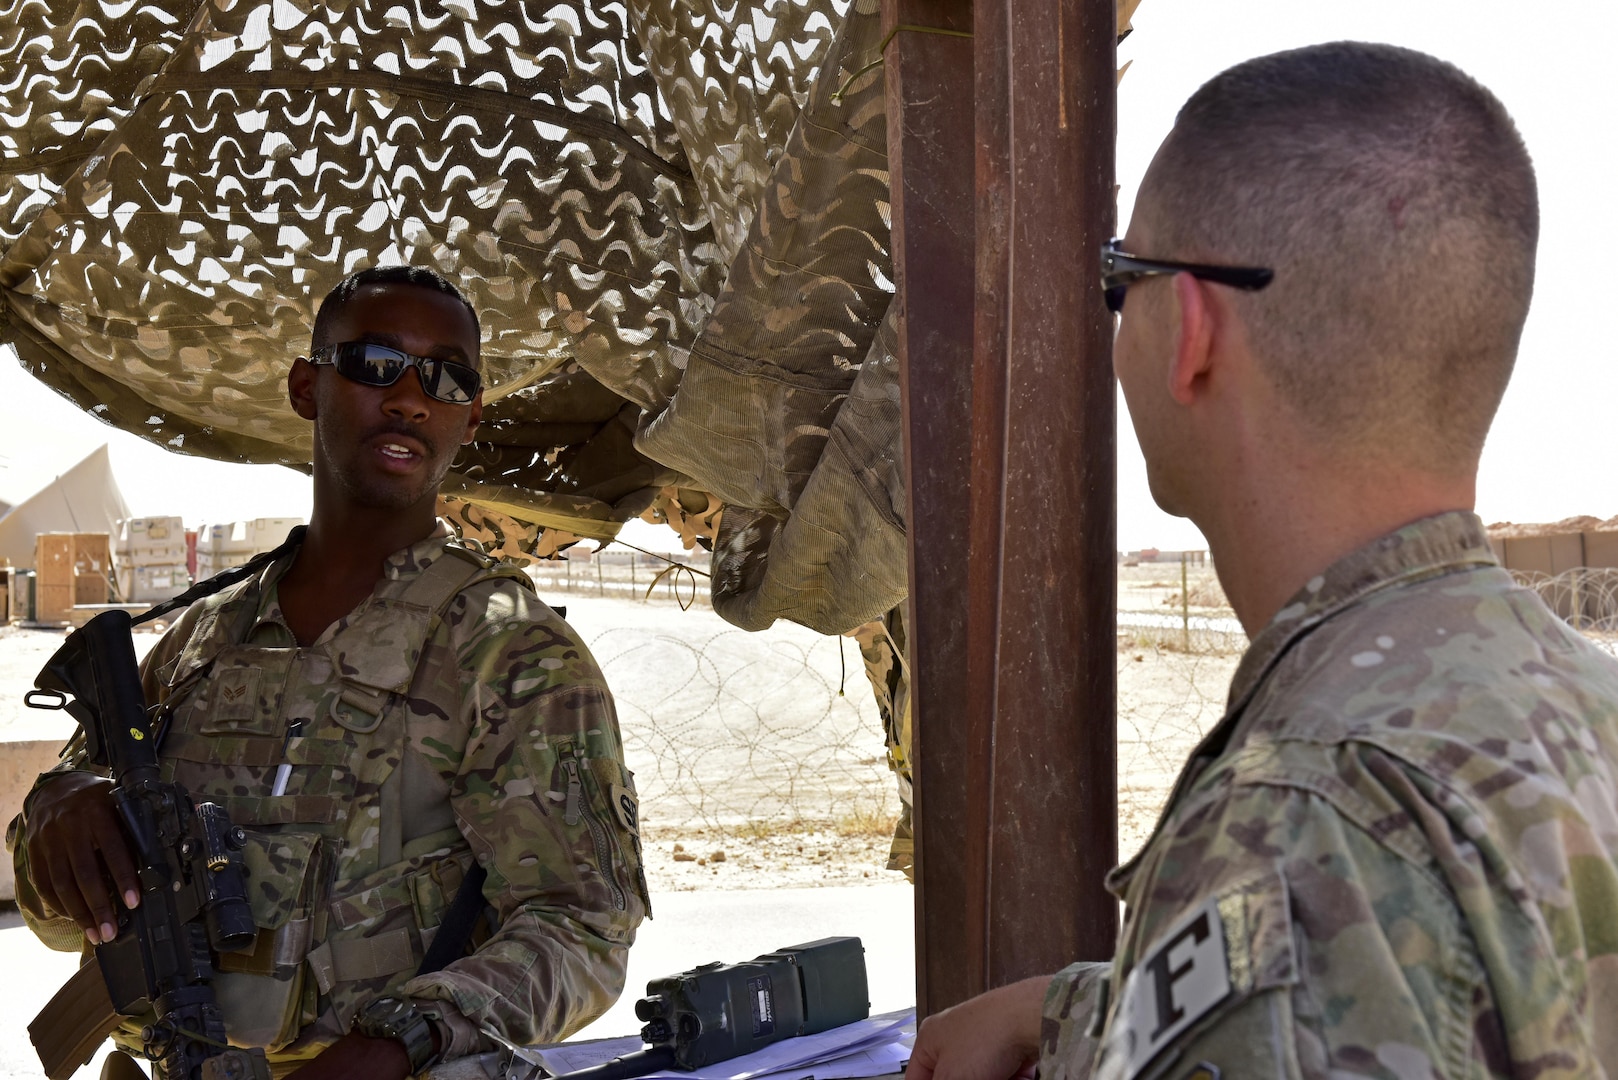 Senior Airman Sionte Campbell, 443d Expeditionary Security Forces Squadron entry controller, speaks to Capt. Jeffrey Robertson, 407th ESFS operations offficer June 22, 2017, at Al Asad Air Base, Iraq. Robertson visited security forces members at Al Asad to check on his Airmen forward deployed there and the current status and capabilities of the unit to accomplish the mission. 